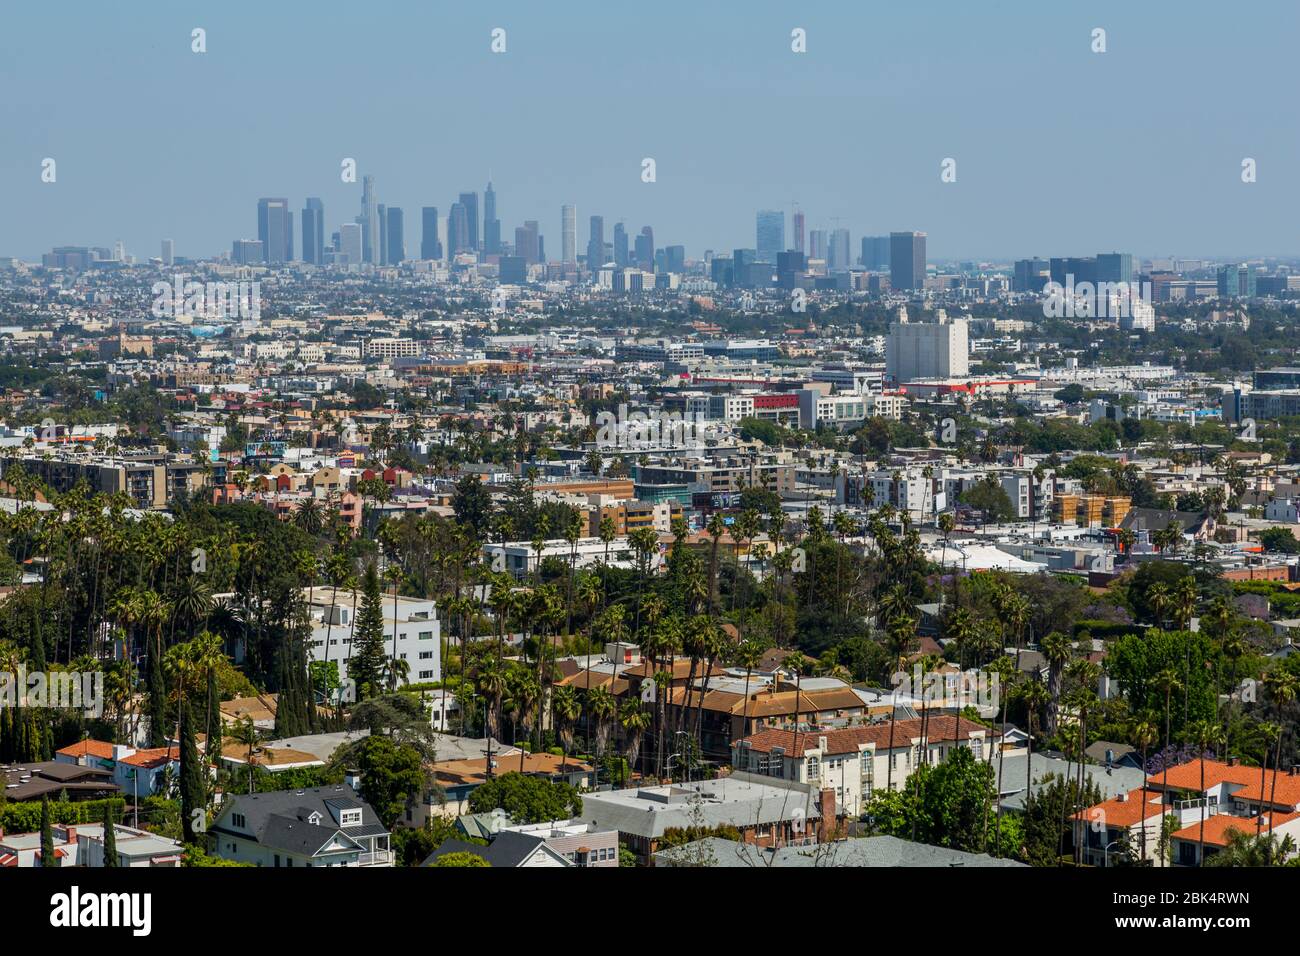 Downtown, Los Angeles, California, United States of America, North